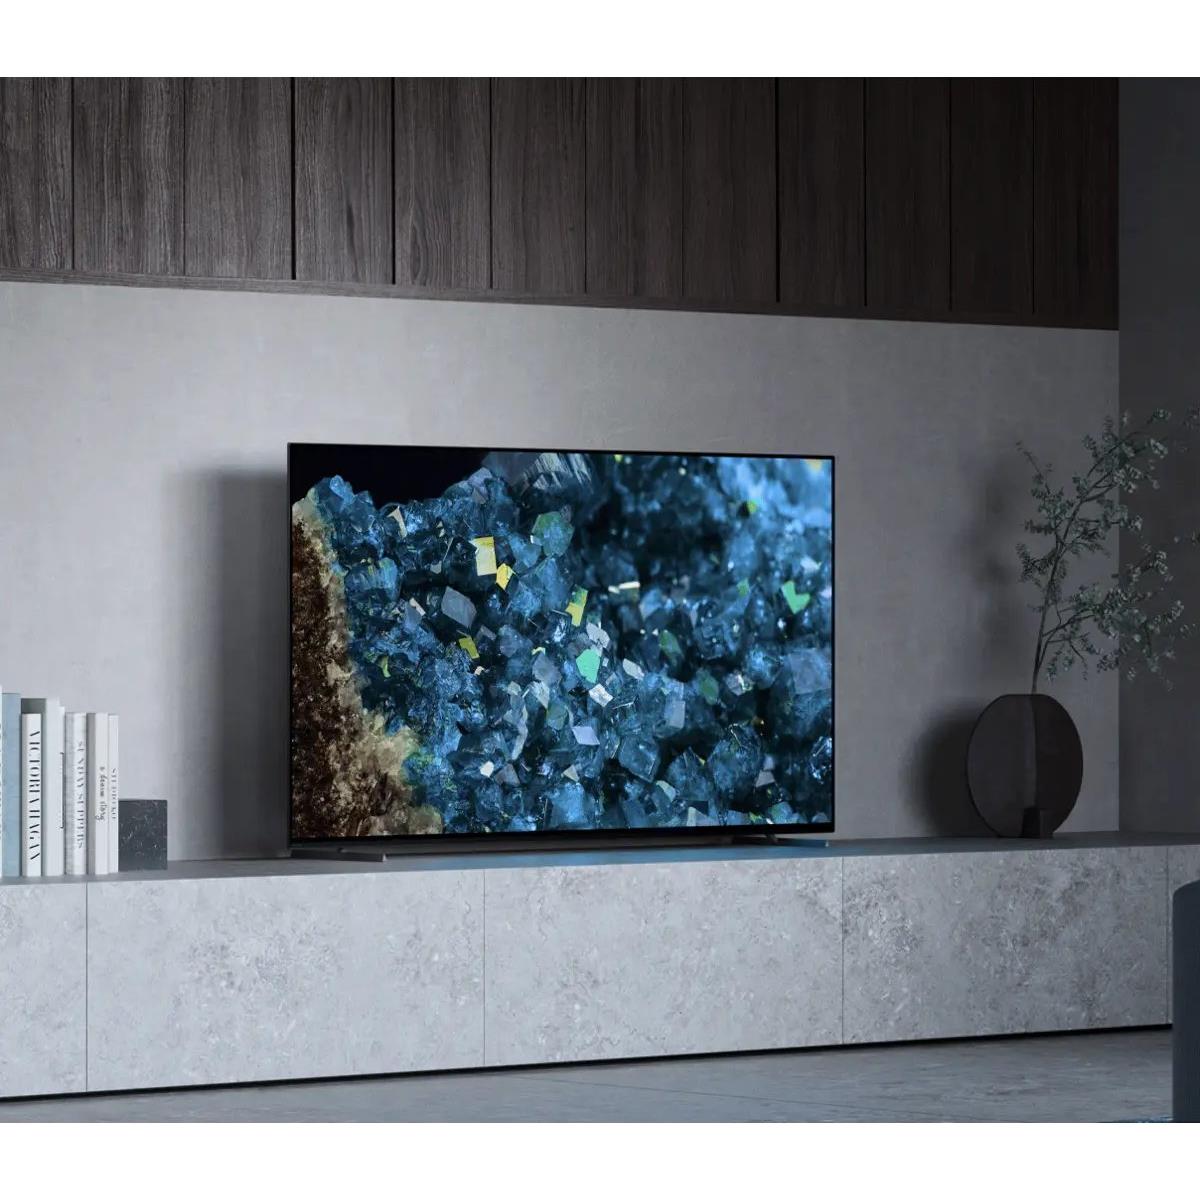 Sony XR83A80L OLED 83 Inch Bravia XR A80L 4K Ultra HD Television HDR Smart TV - Sony-XR83A80L